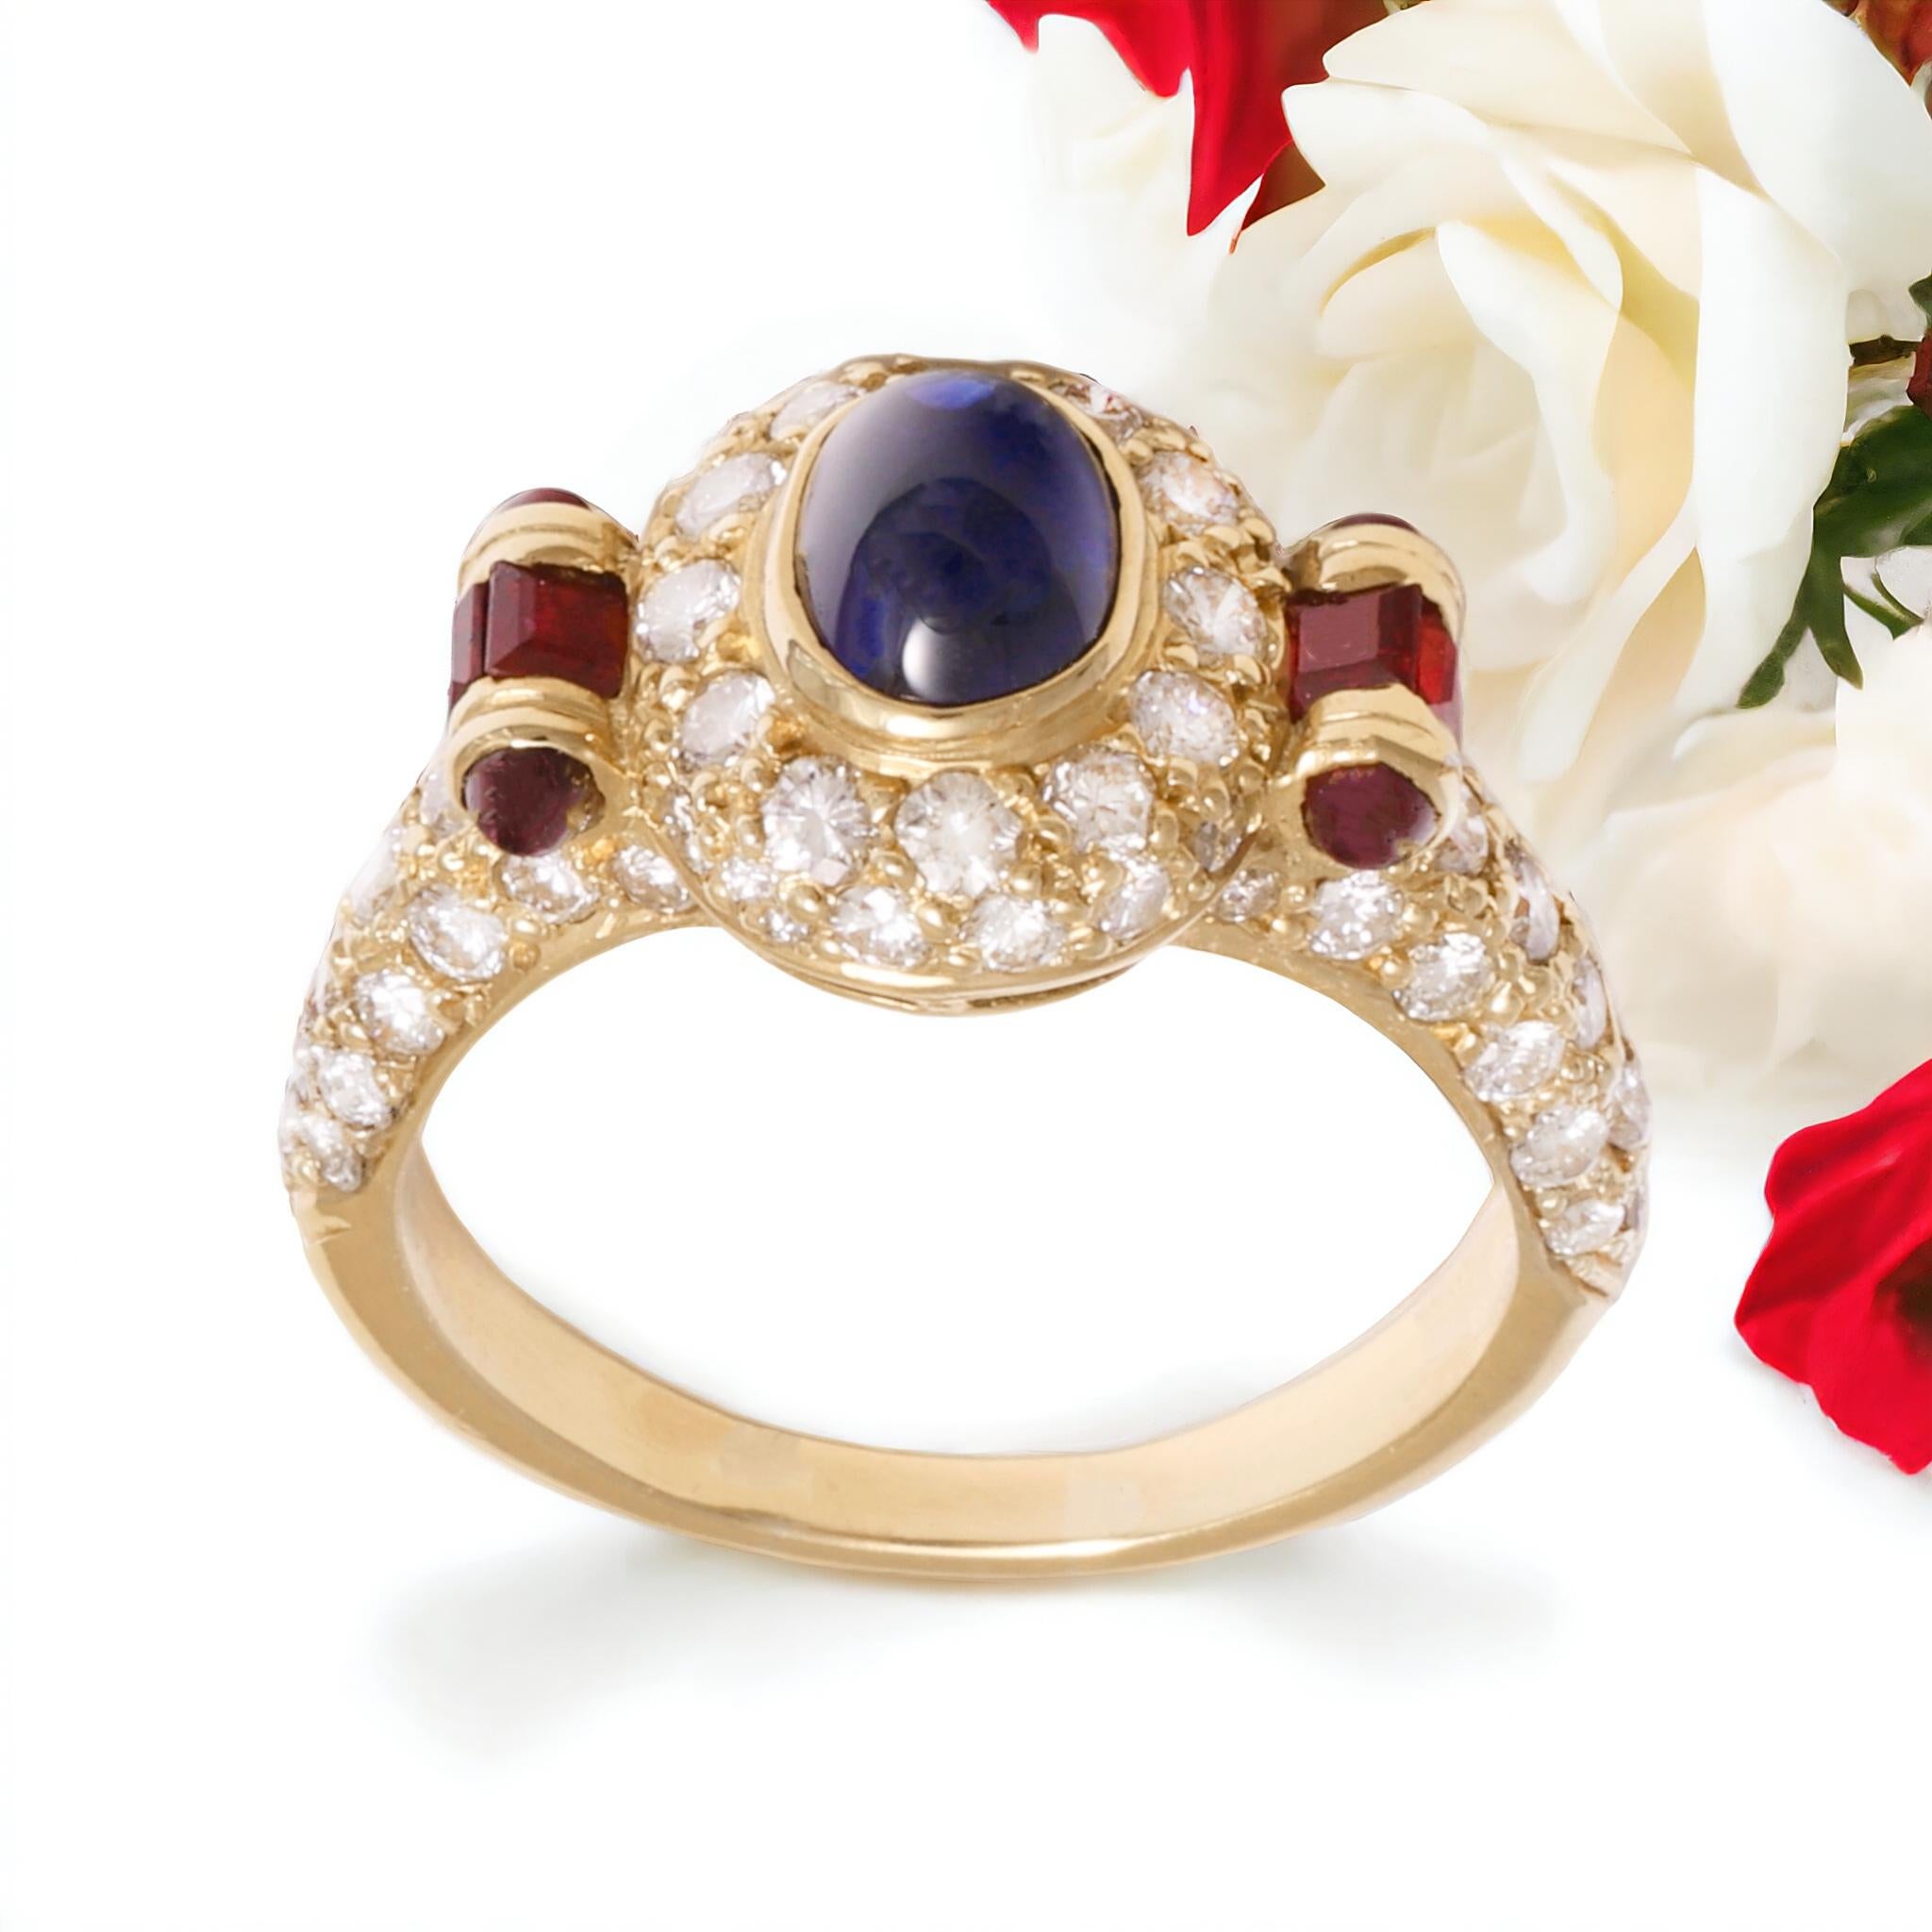  18 kt. Gold Ring With 1.20 ct. Cabochon Sapphire & Ruby & Diamond For Sale 2